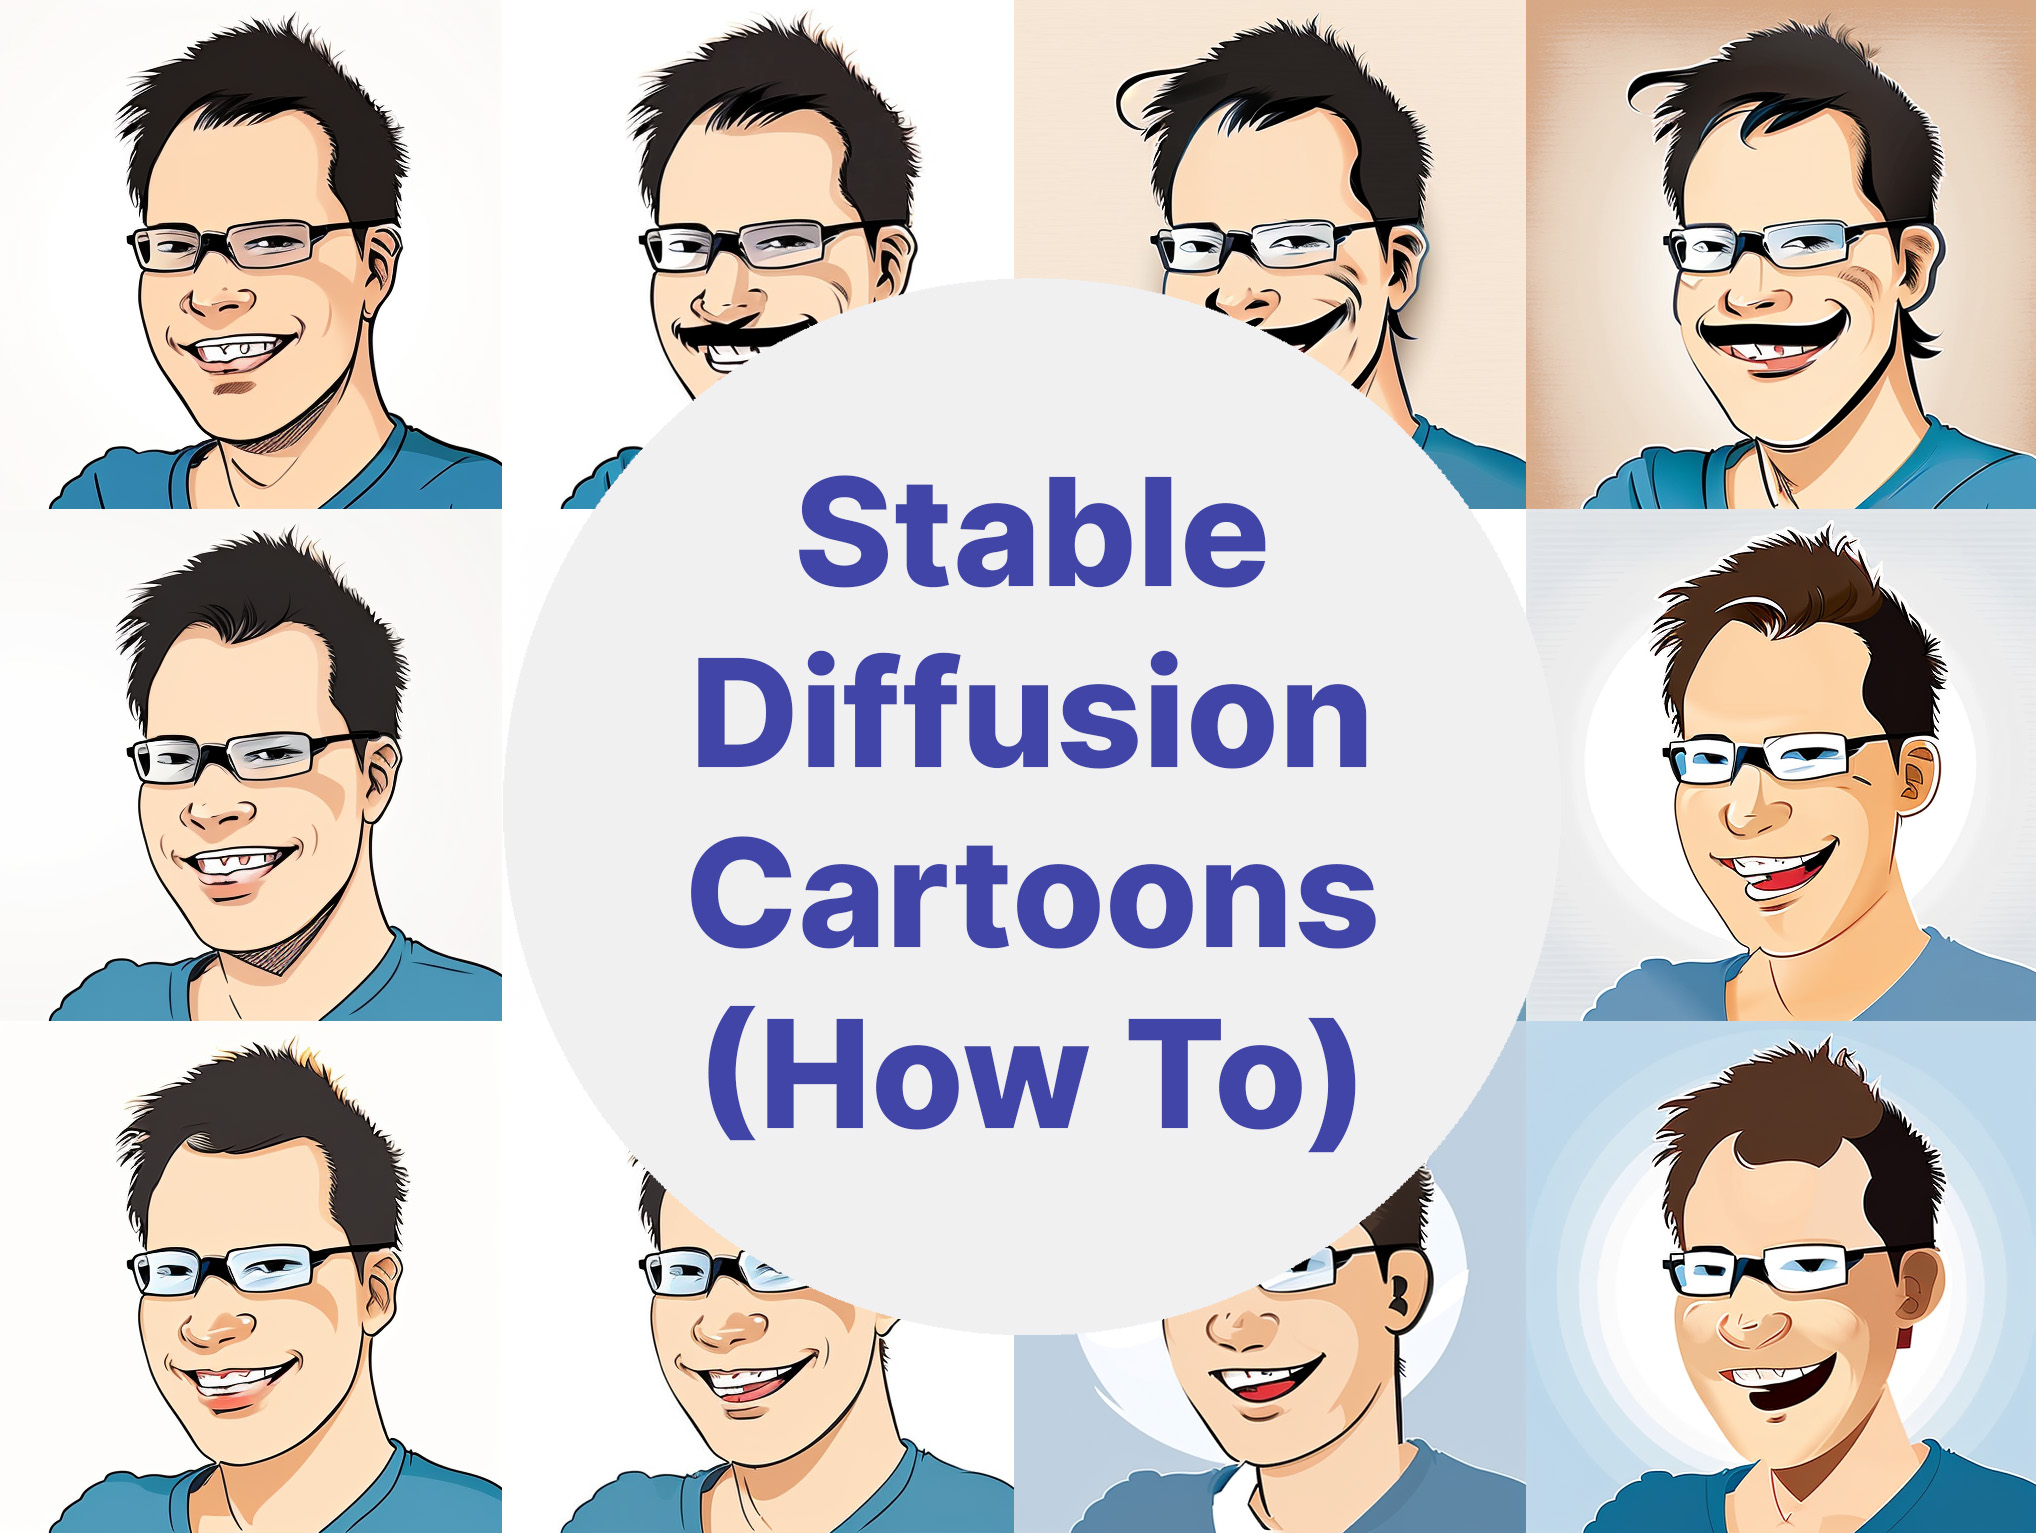 Turn Selfie Into Cartoon With Stable Diffusion Xuyun Zeng